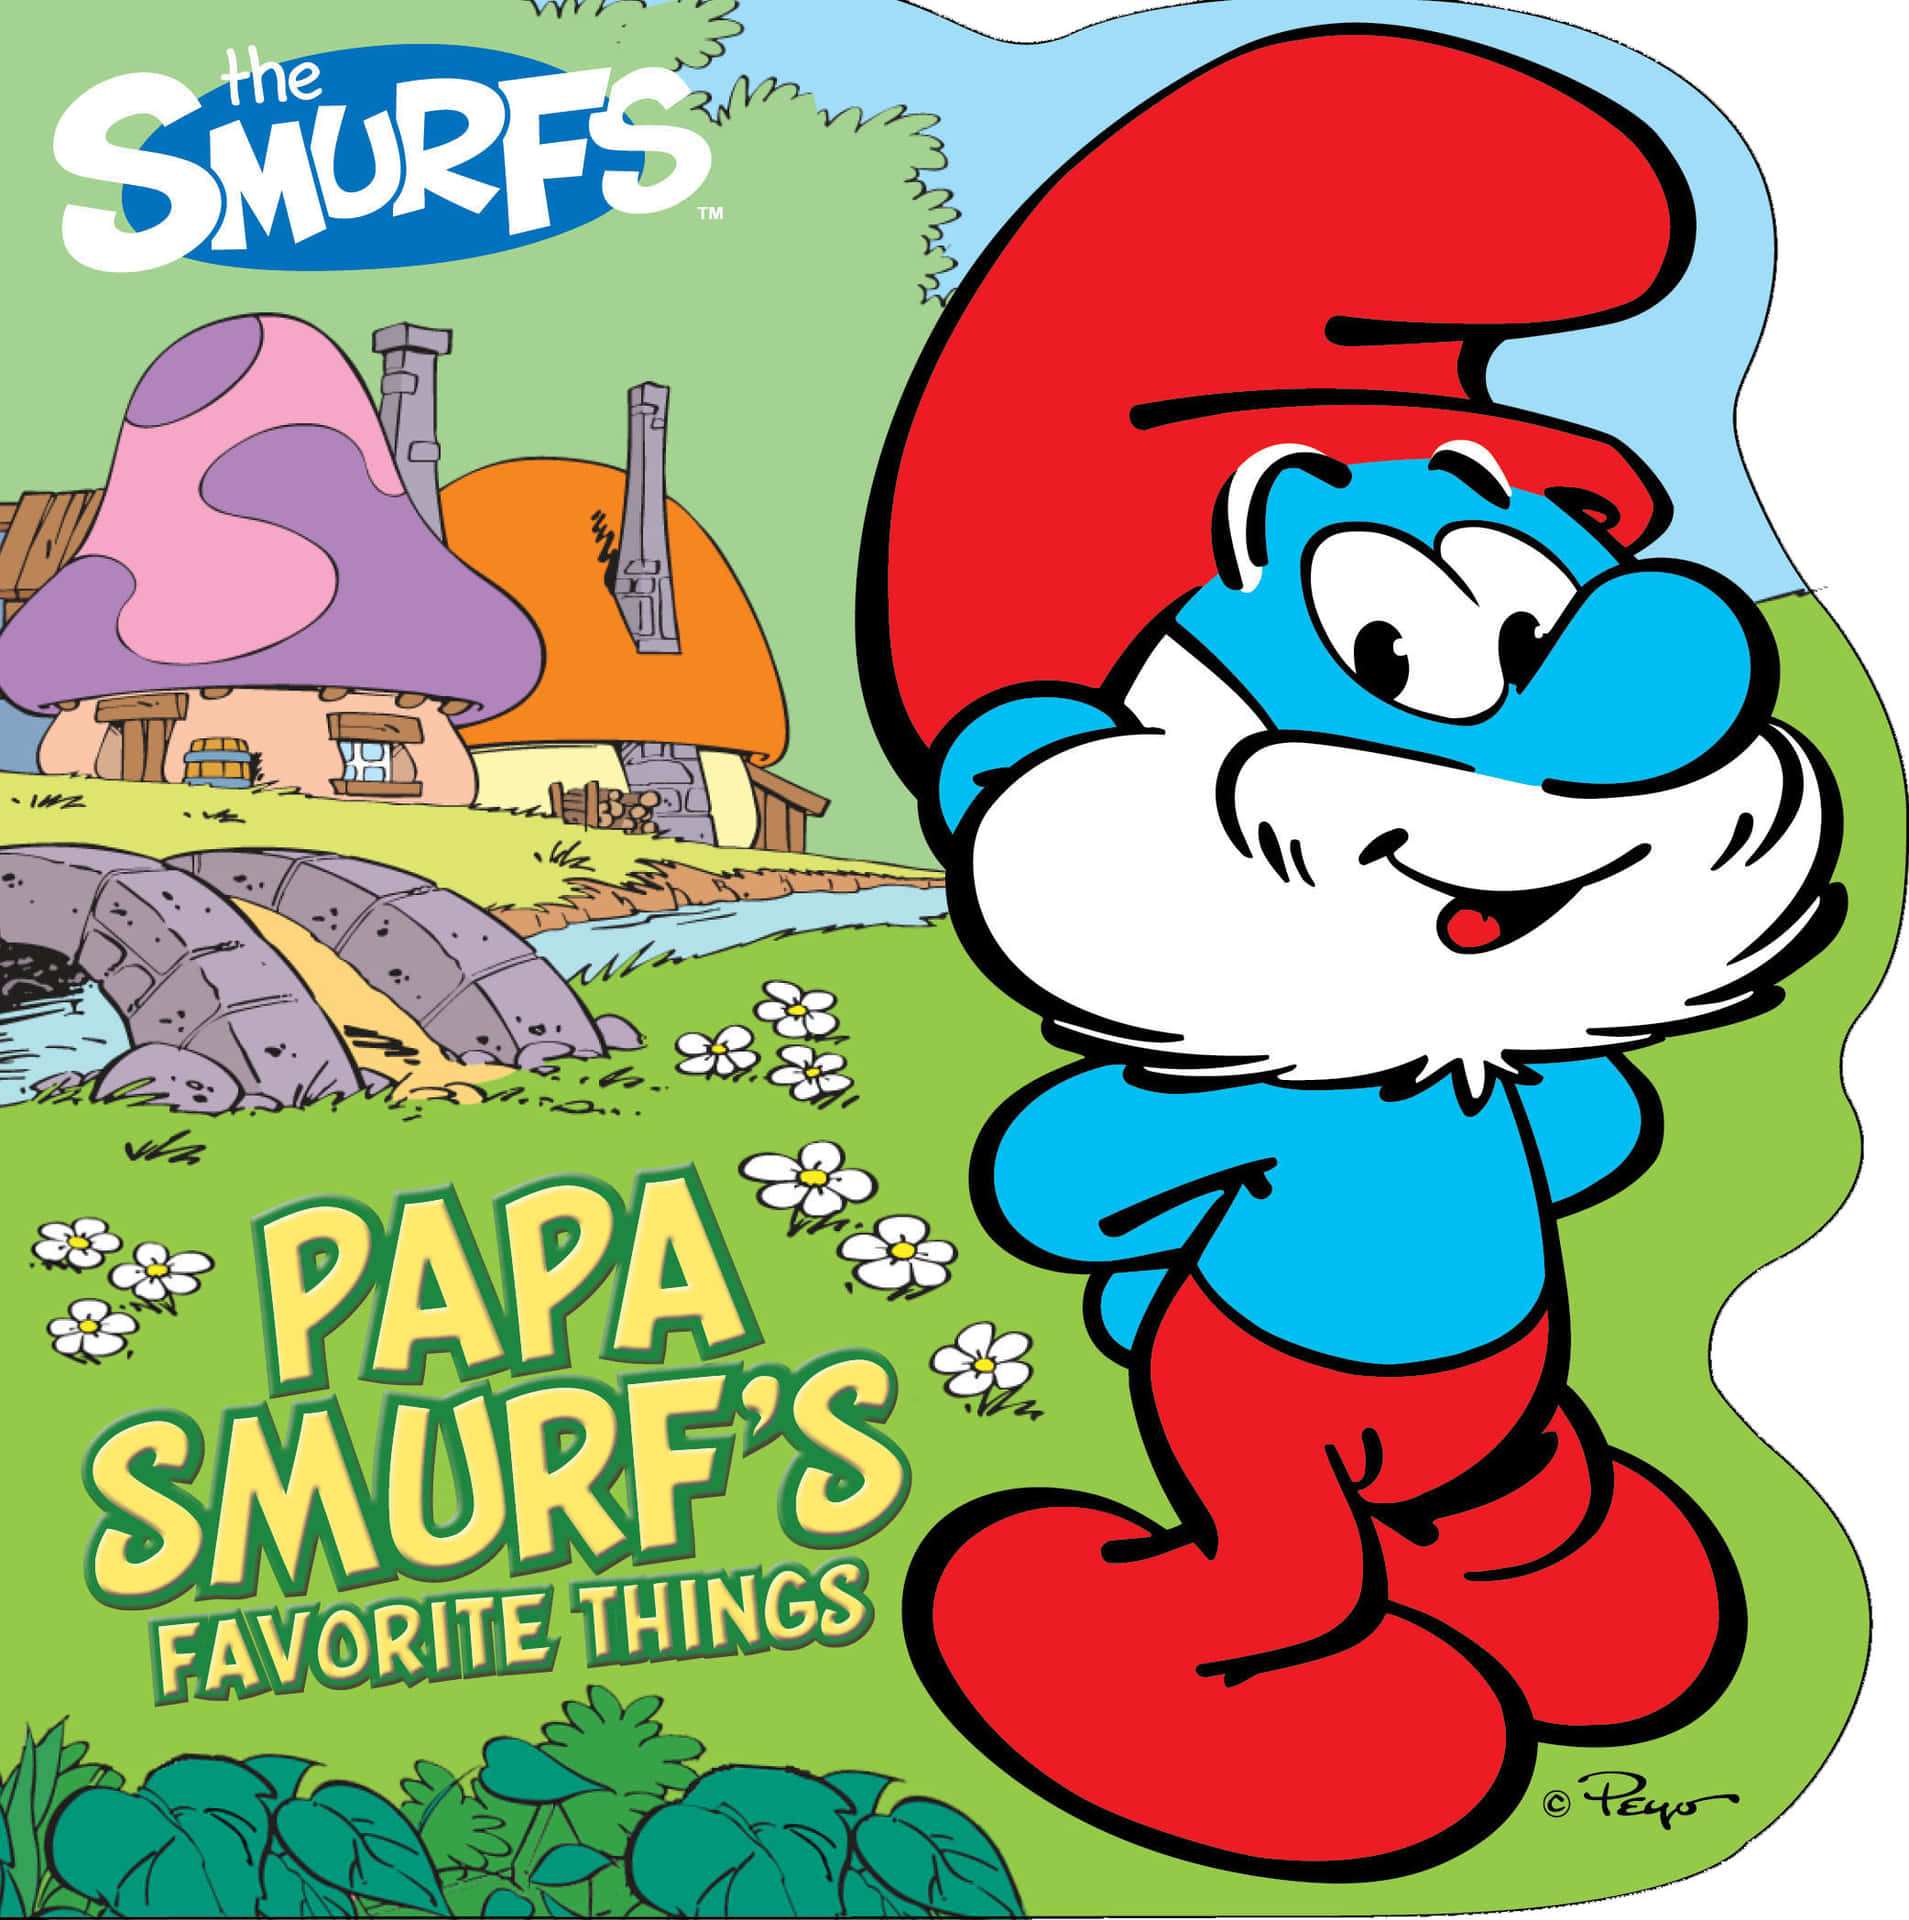 The Smurfs enjoying a day of fun and friendship!